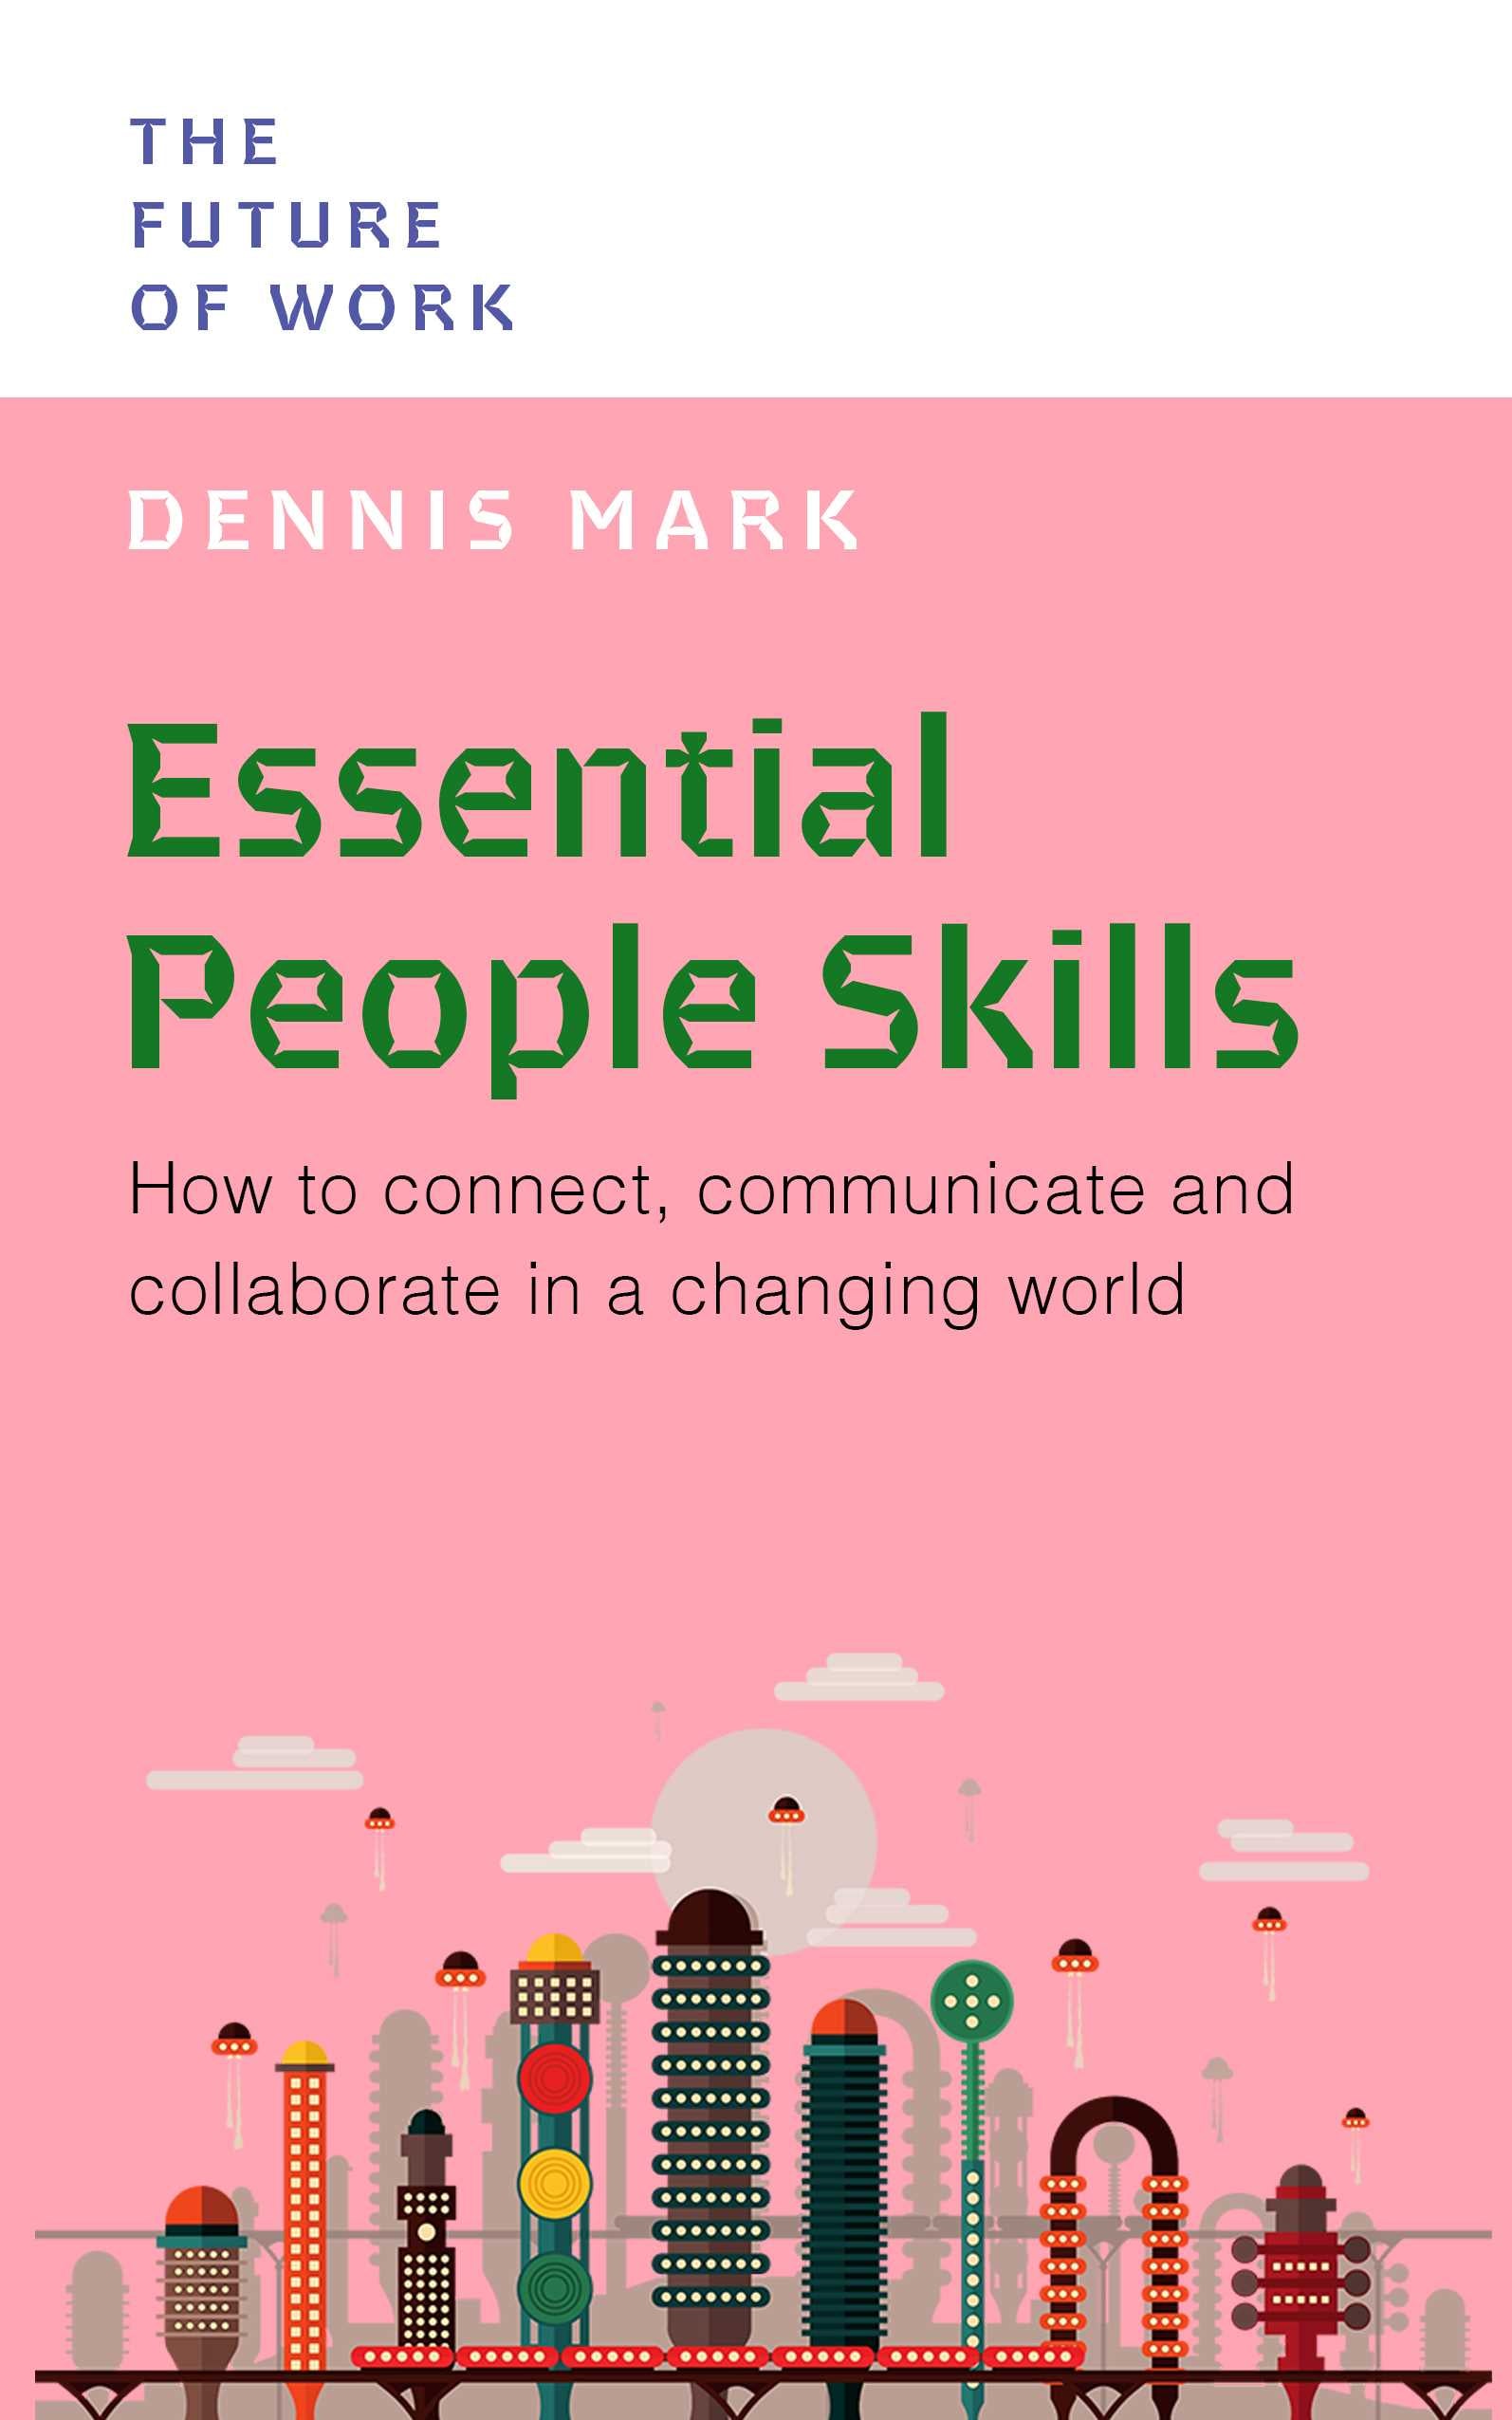 Essential People Skills: How to Connect, Communicate and Collaborate in a Changing World